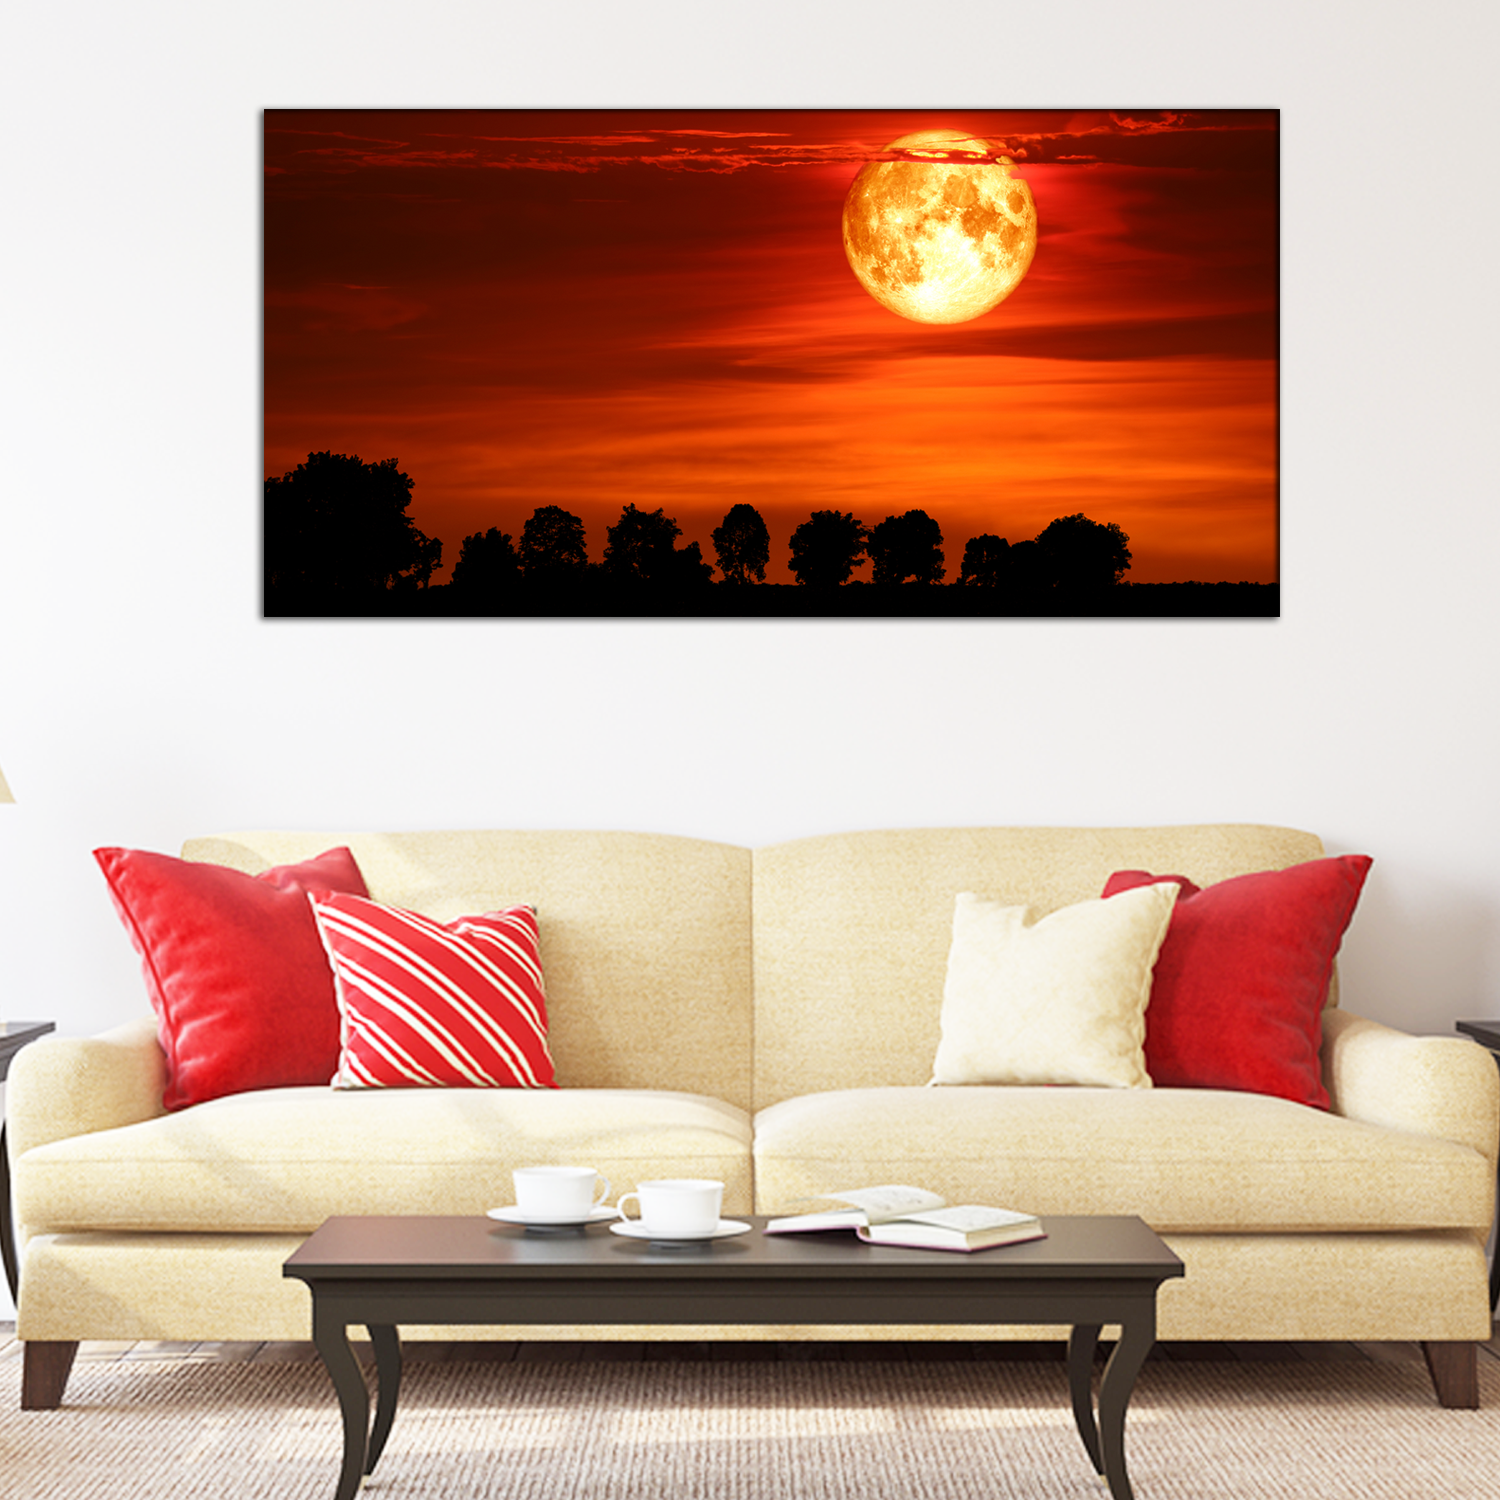 Abstract Sunset Canvas Print Wall Painting